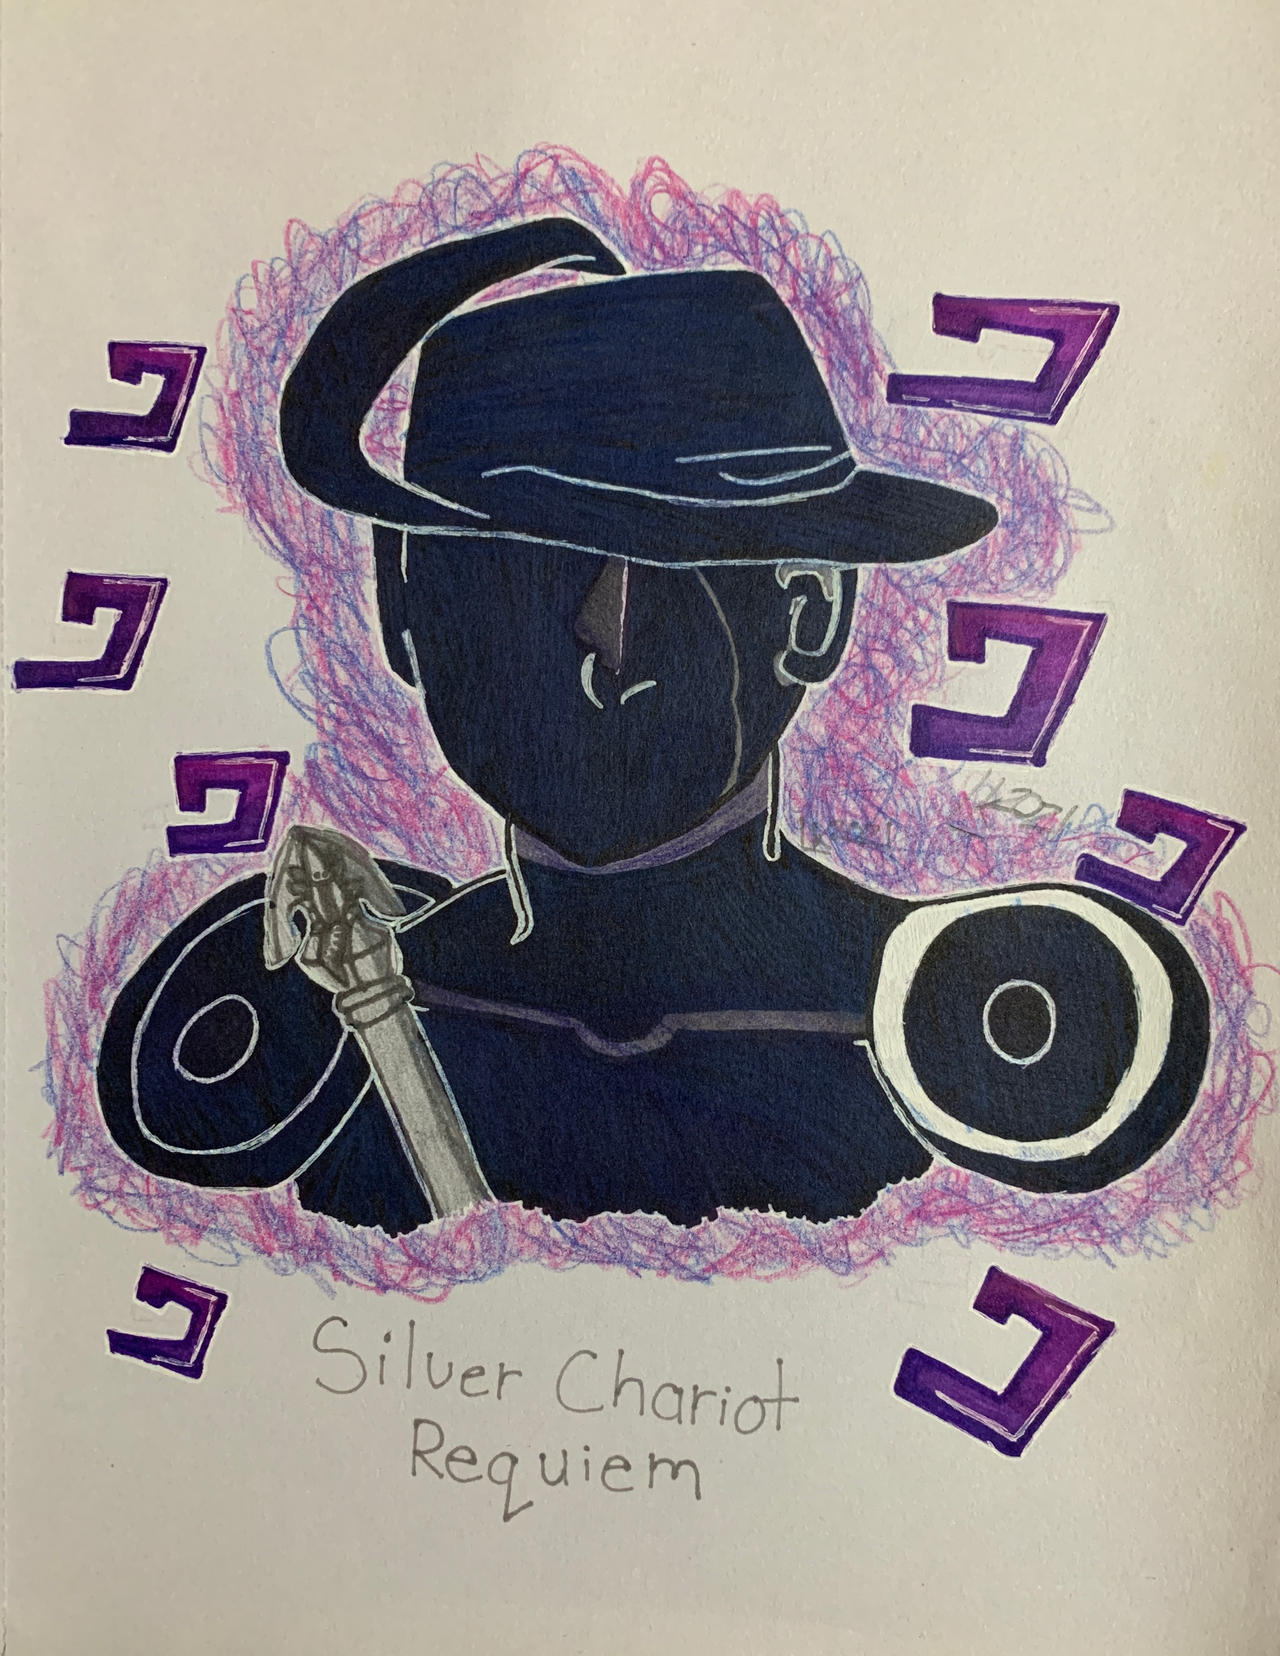 All JoJo Stands #5 - Silver Chariot by NiezziQ on DeviantArt